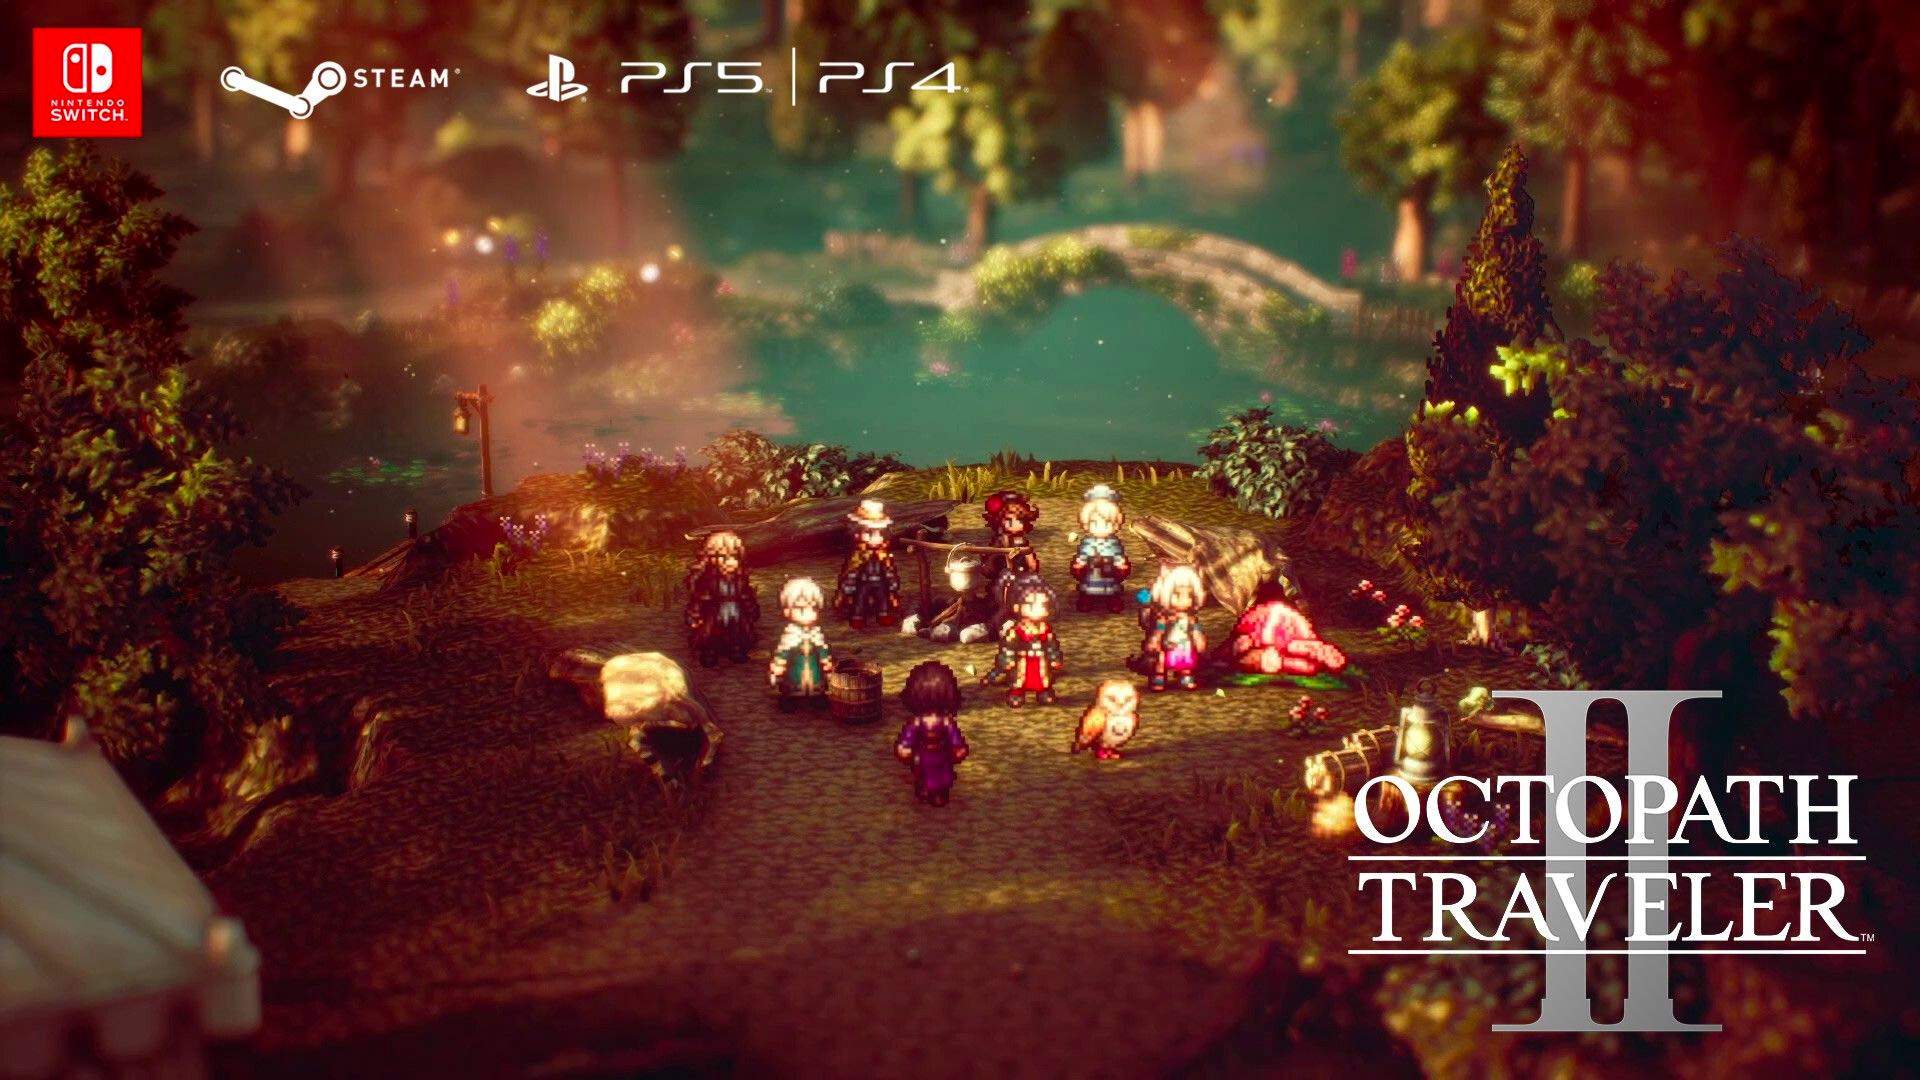 The 8 characters of the game are shown around a campfire behind the Octopath Traveler 2